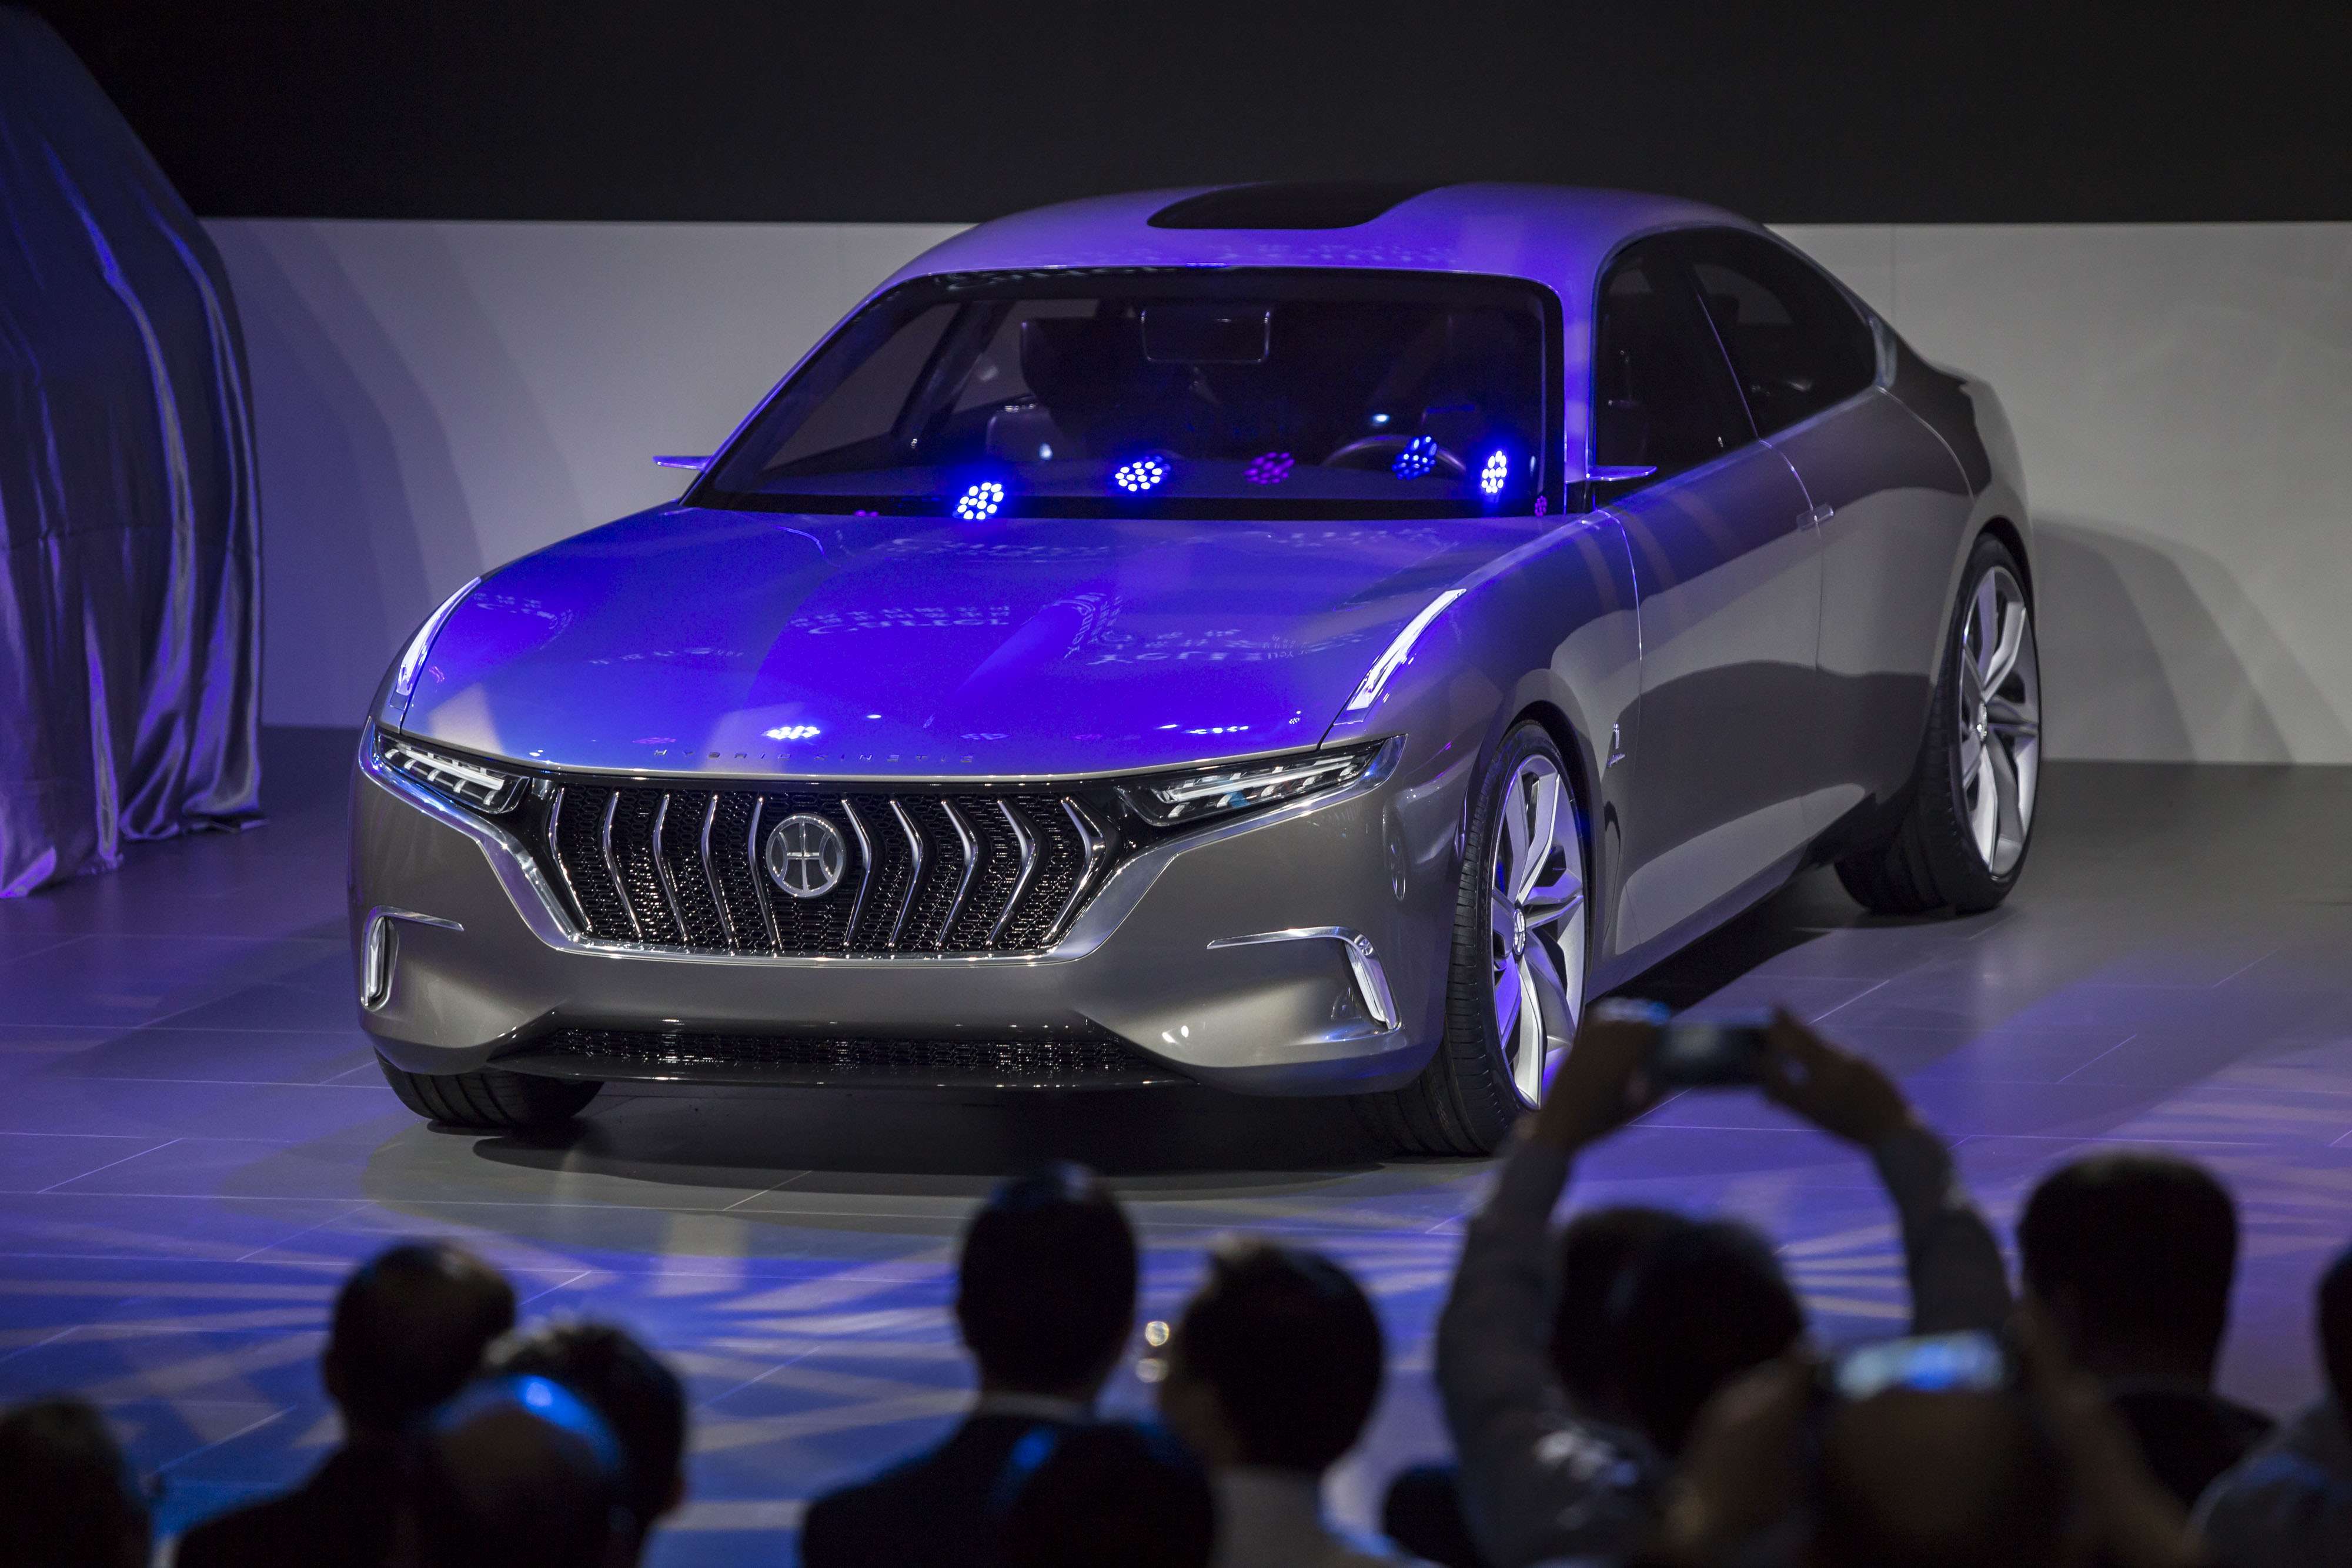 The H600 prototype developed by Hybrid Kinetic Group Ltd., designed with Pininfarina SpA, stands on display at the Auto Shanghai 2017 vehicle show in Shanghai, China, on Wednesday, April 19, 2017. Photo: Bloomberg